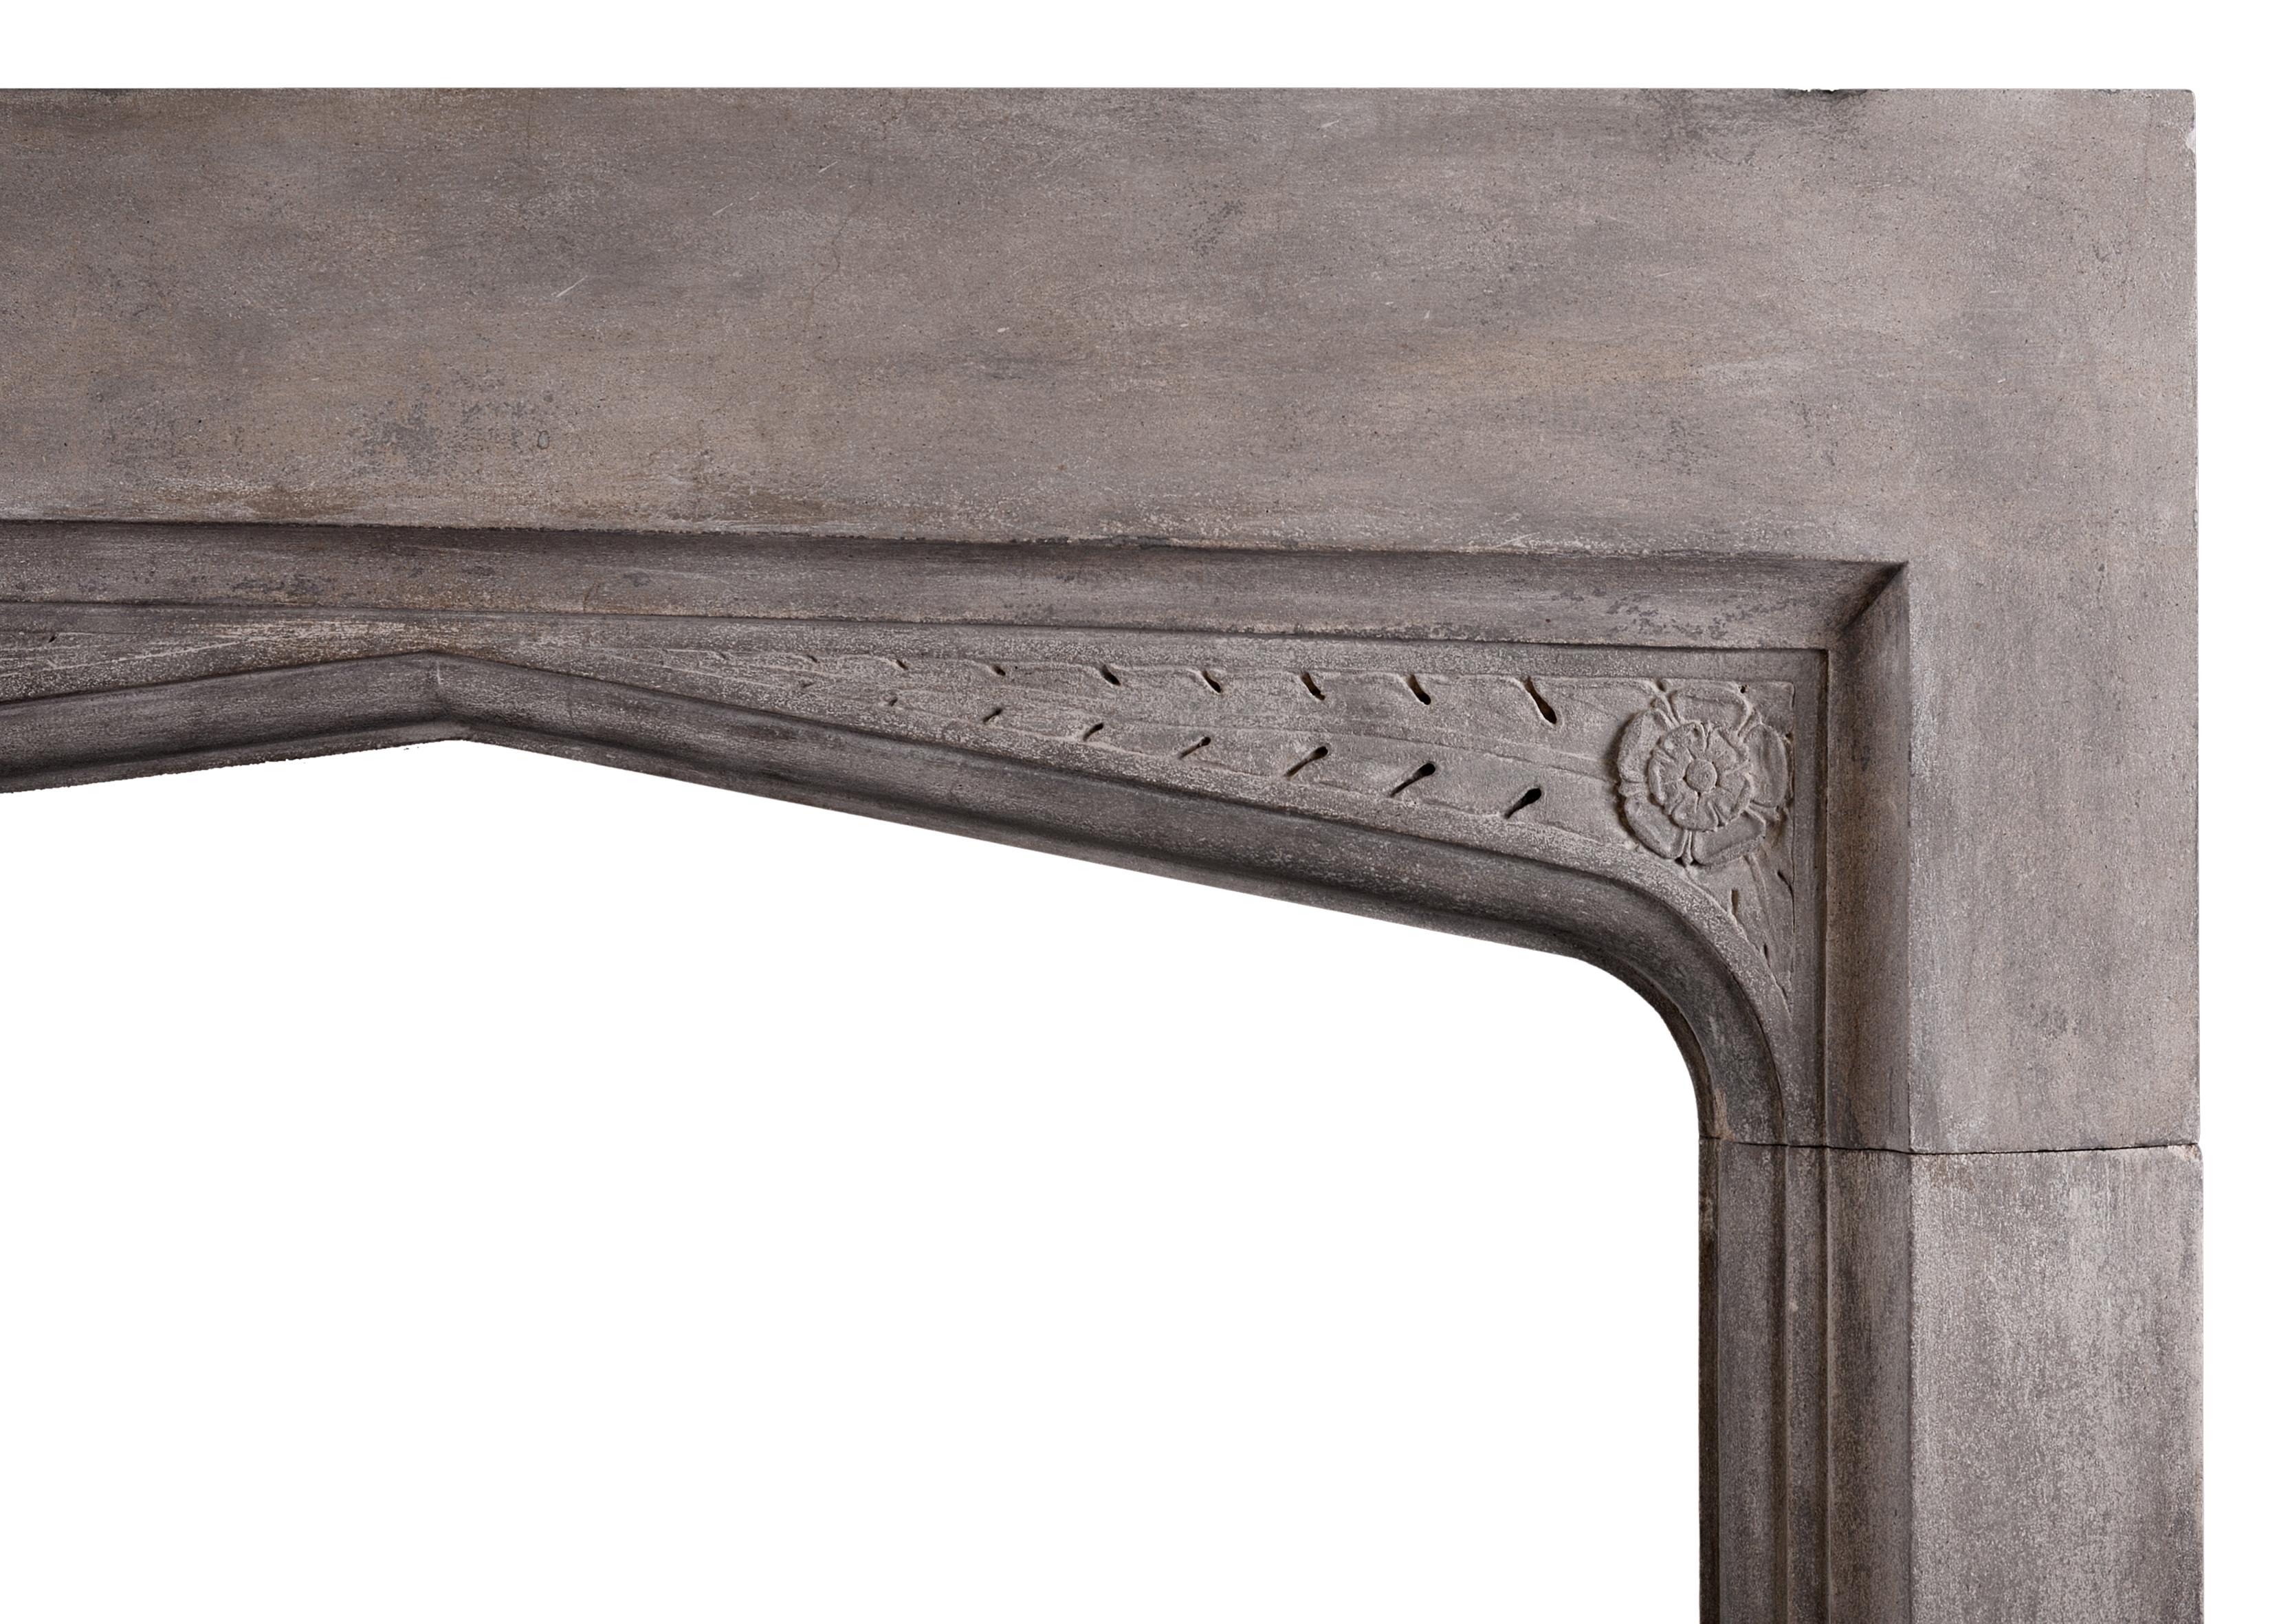 A rustic English stone fireplace in the Gothic manner. The moulded jambs surmounted by arched frieze featuring carved spandrels. English, circa 1900.


Measures: Shelf width 1667 mm 65 ? in
Overall height 1340 mm 52 ¾ in
Opening height 1029 mm